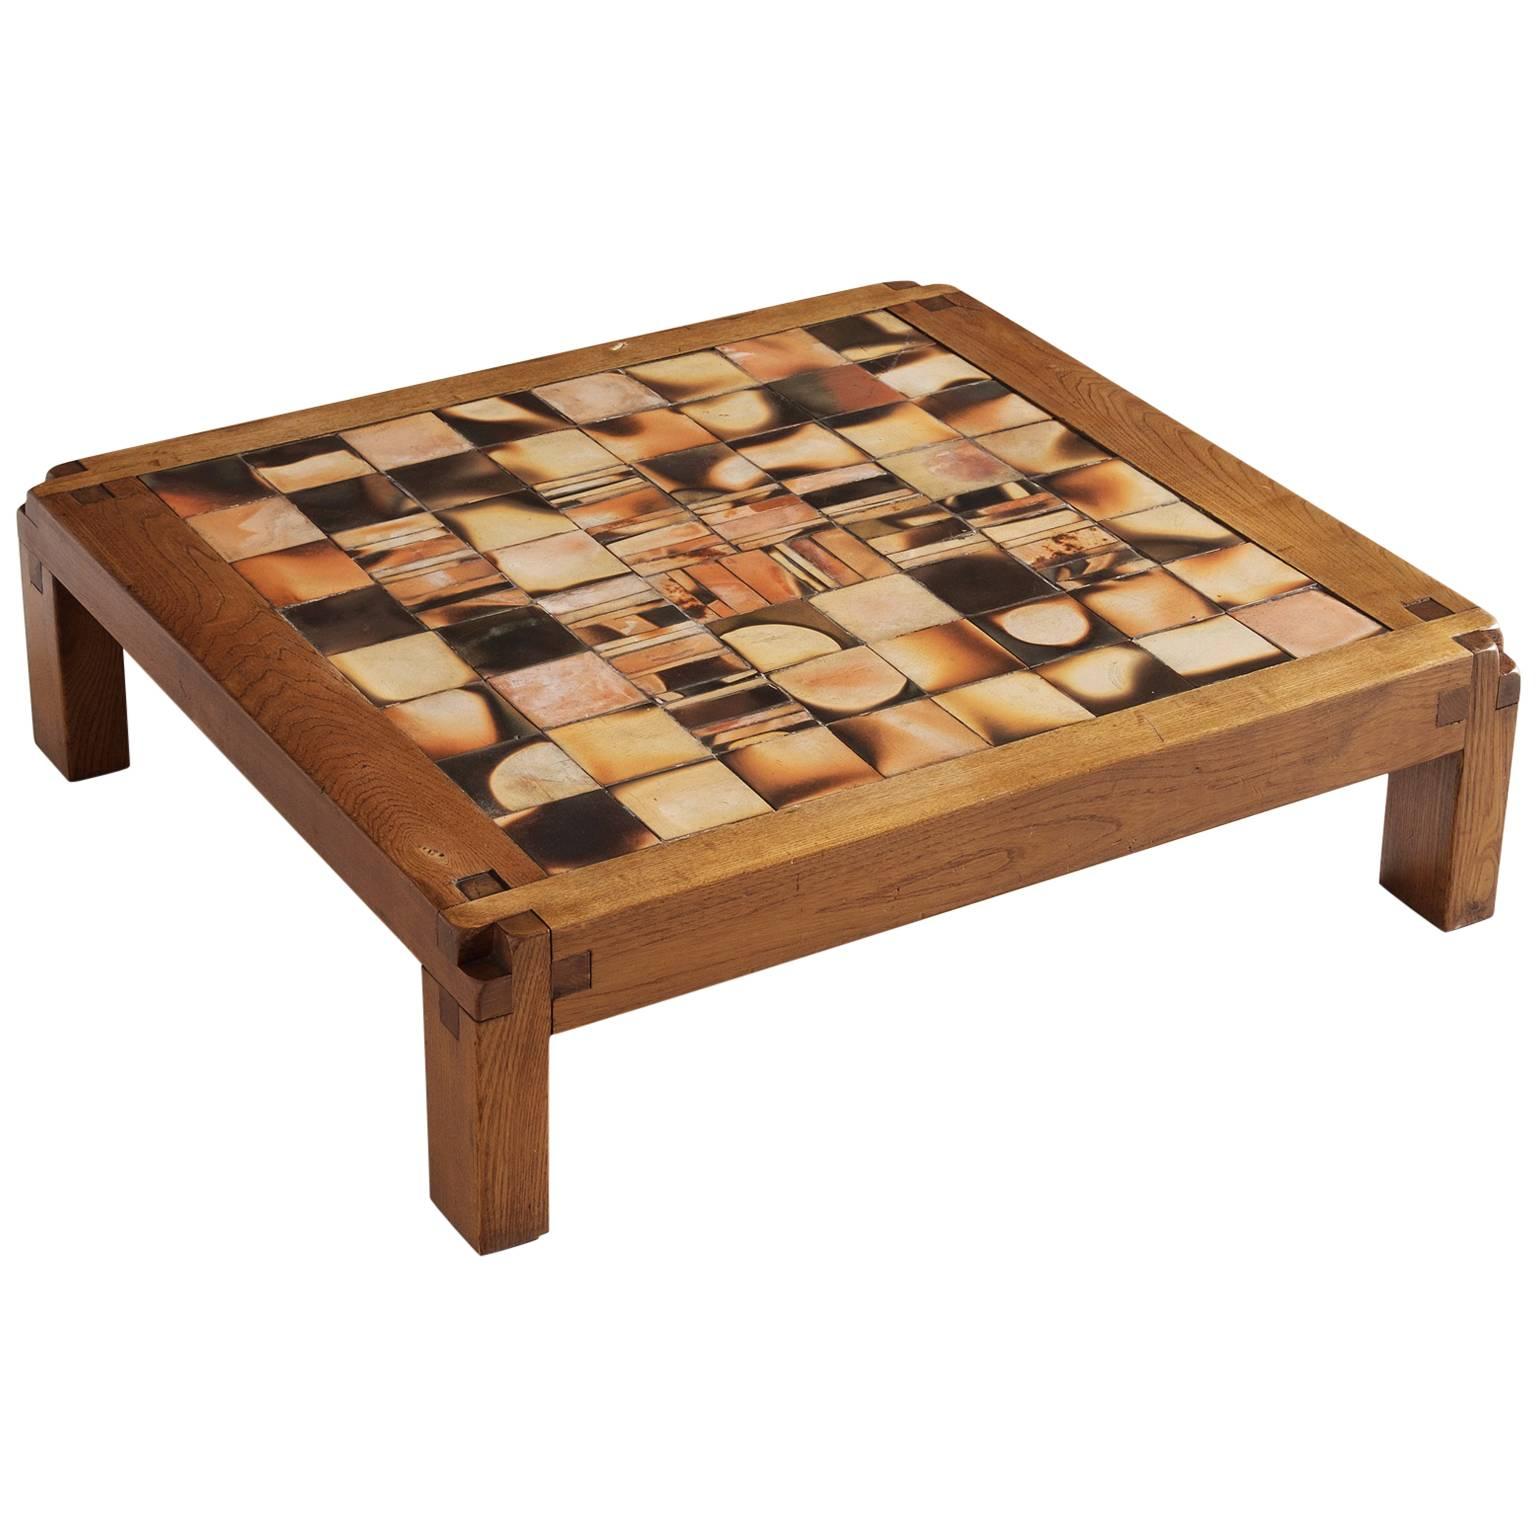 Pierre Chapo Coffee Table in Elmwood and Ceramic